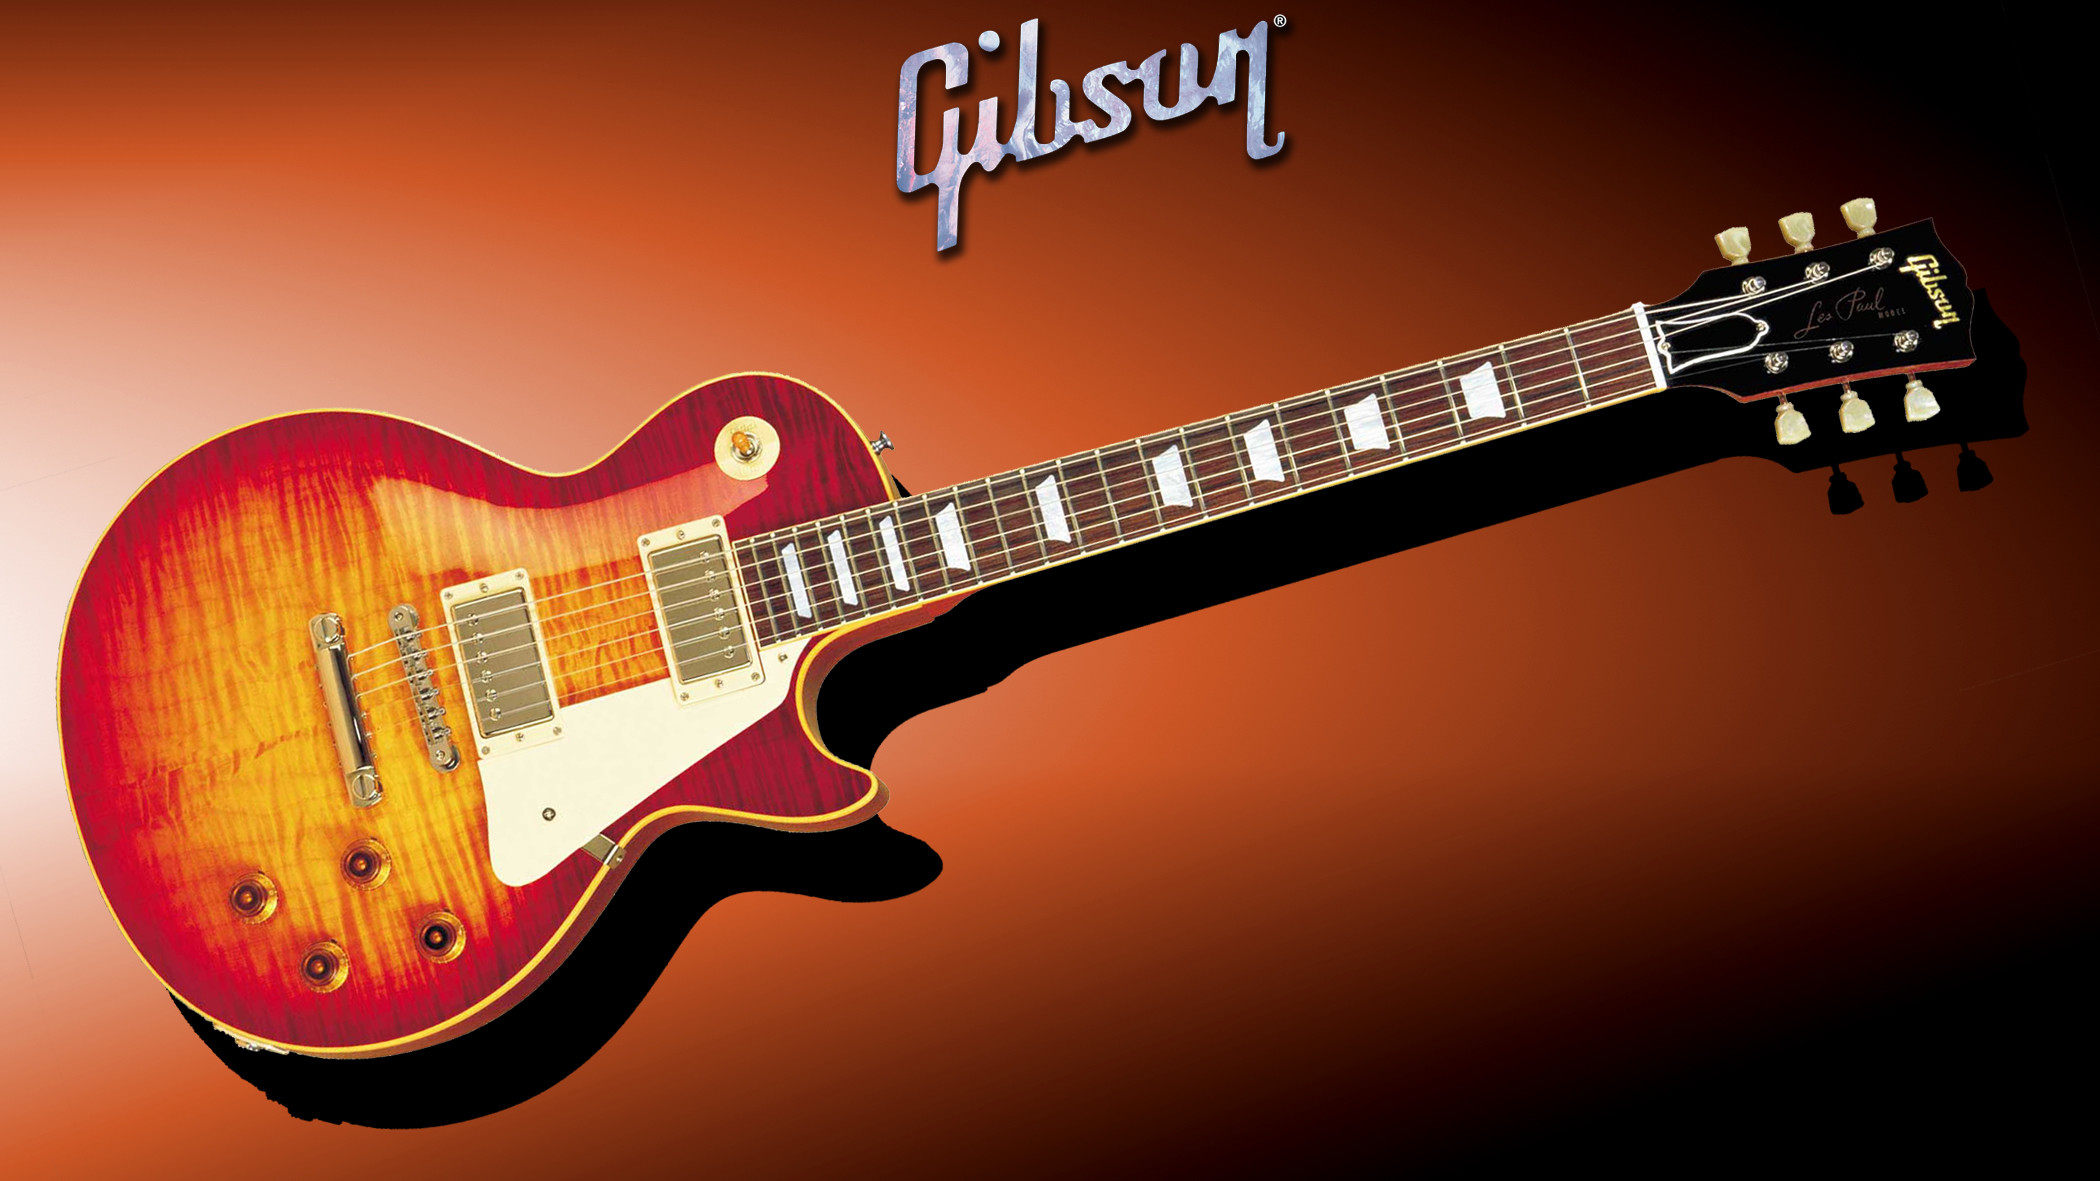 2100x1181 Search Results for “les paul wallpaper widescreen” – Adorable Wallpapers